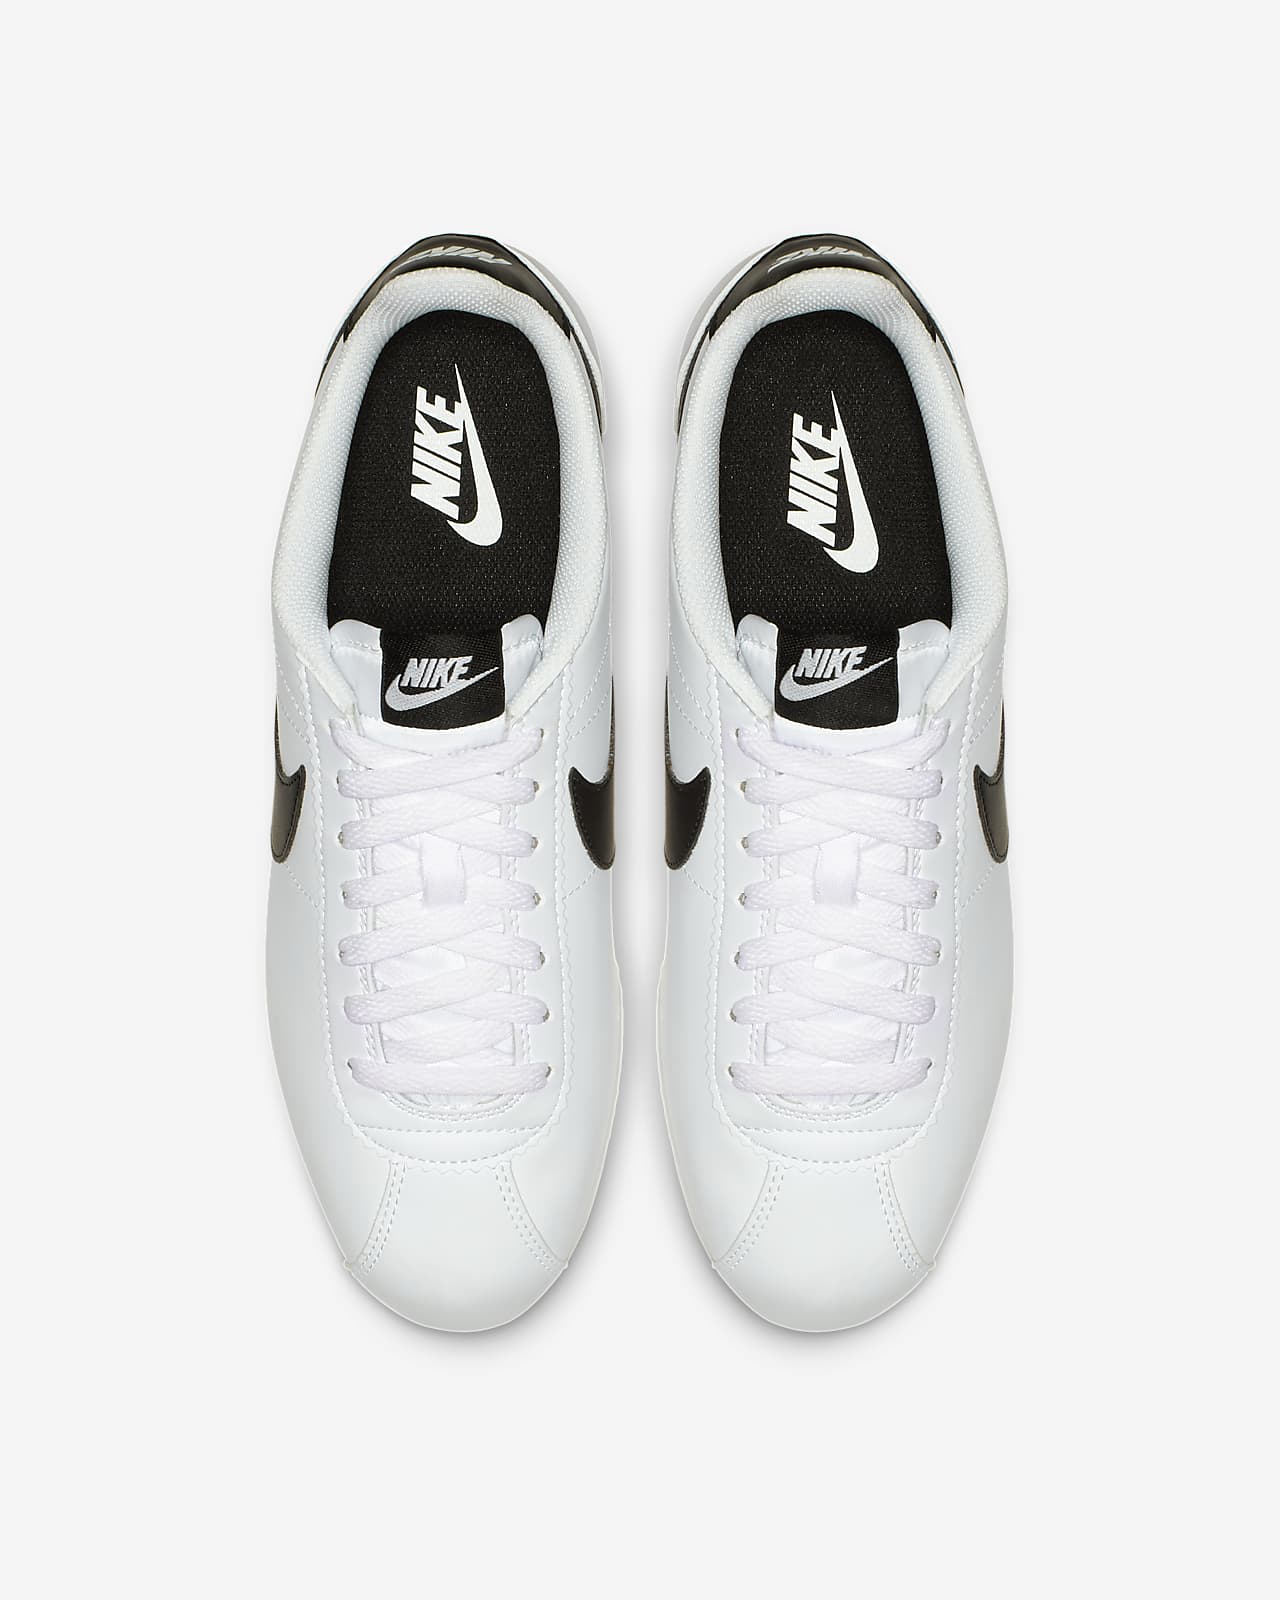 nike cortez price at edgars cheap online